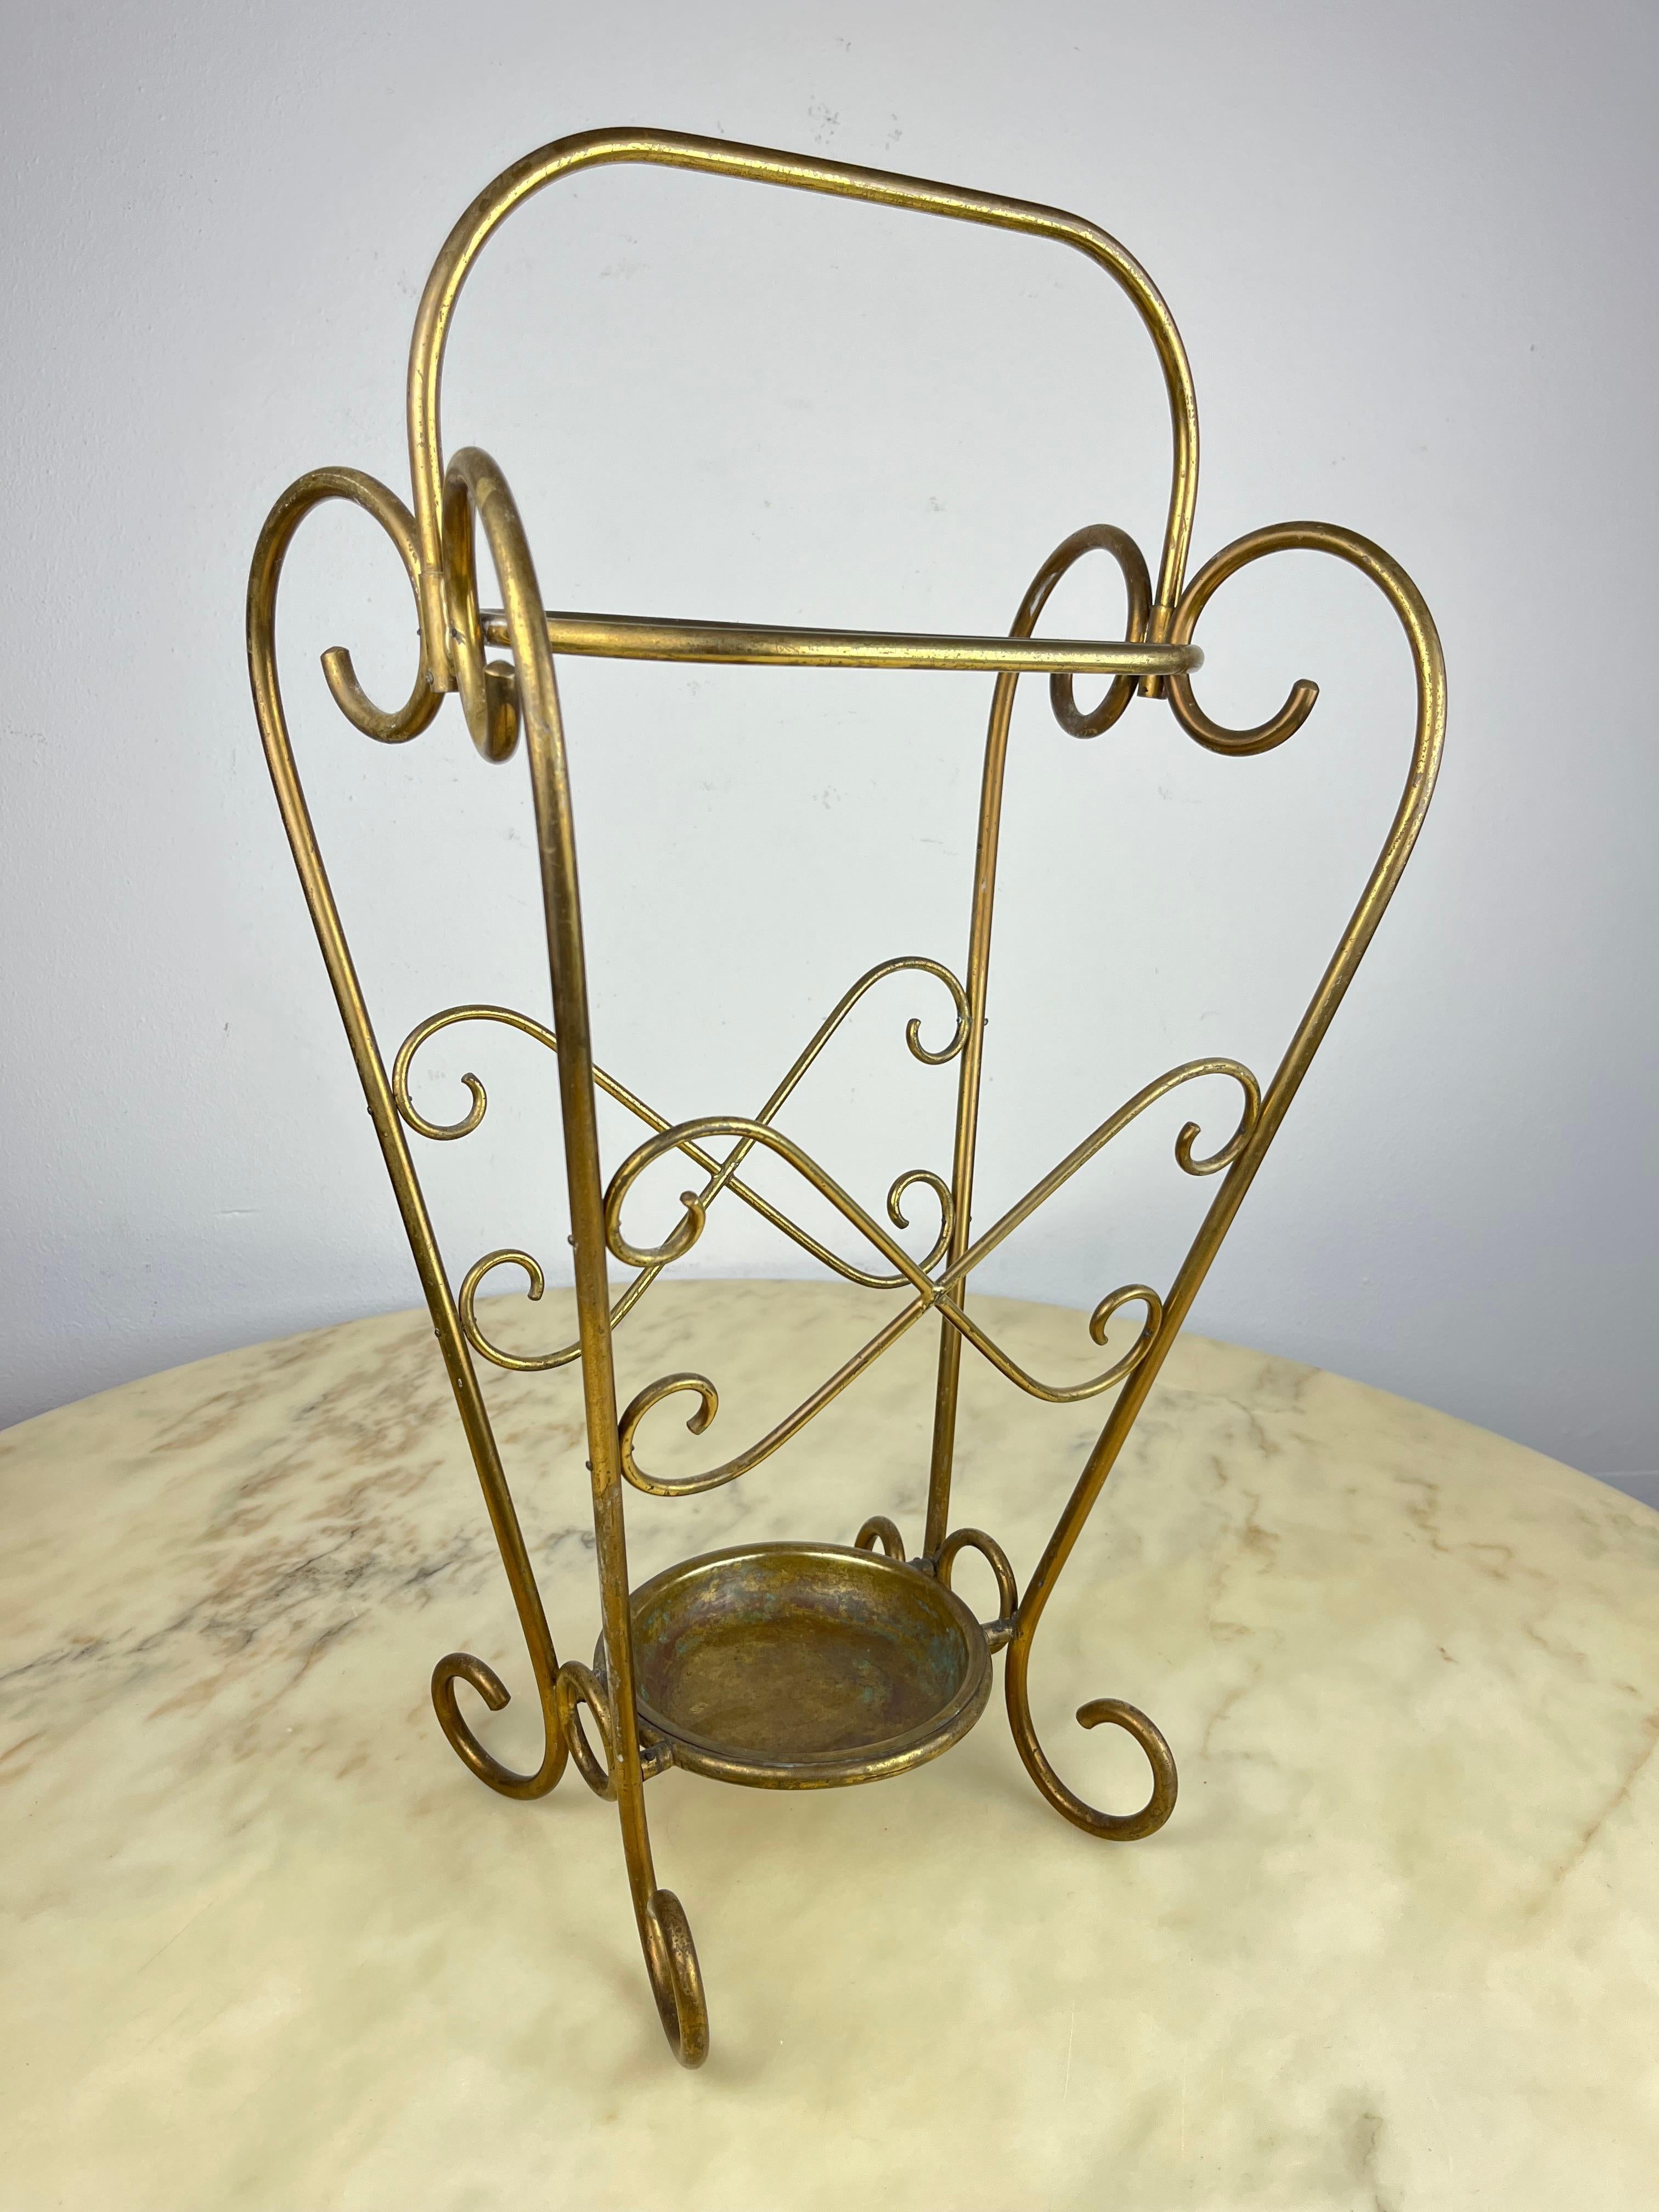 Antique Italian brass umbrella stand, 1950s
Good condition, found in a noble apartment.